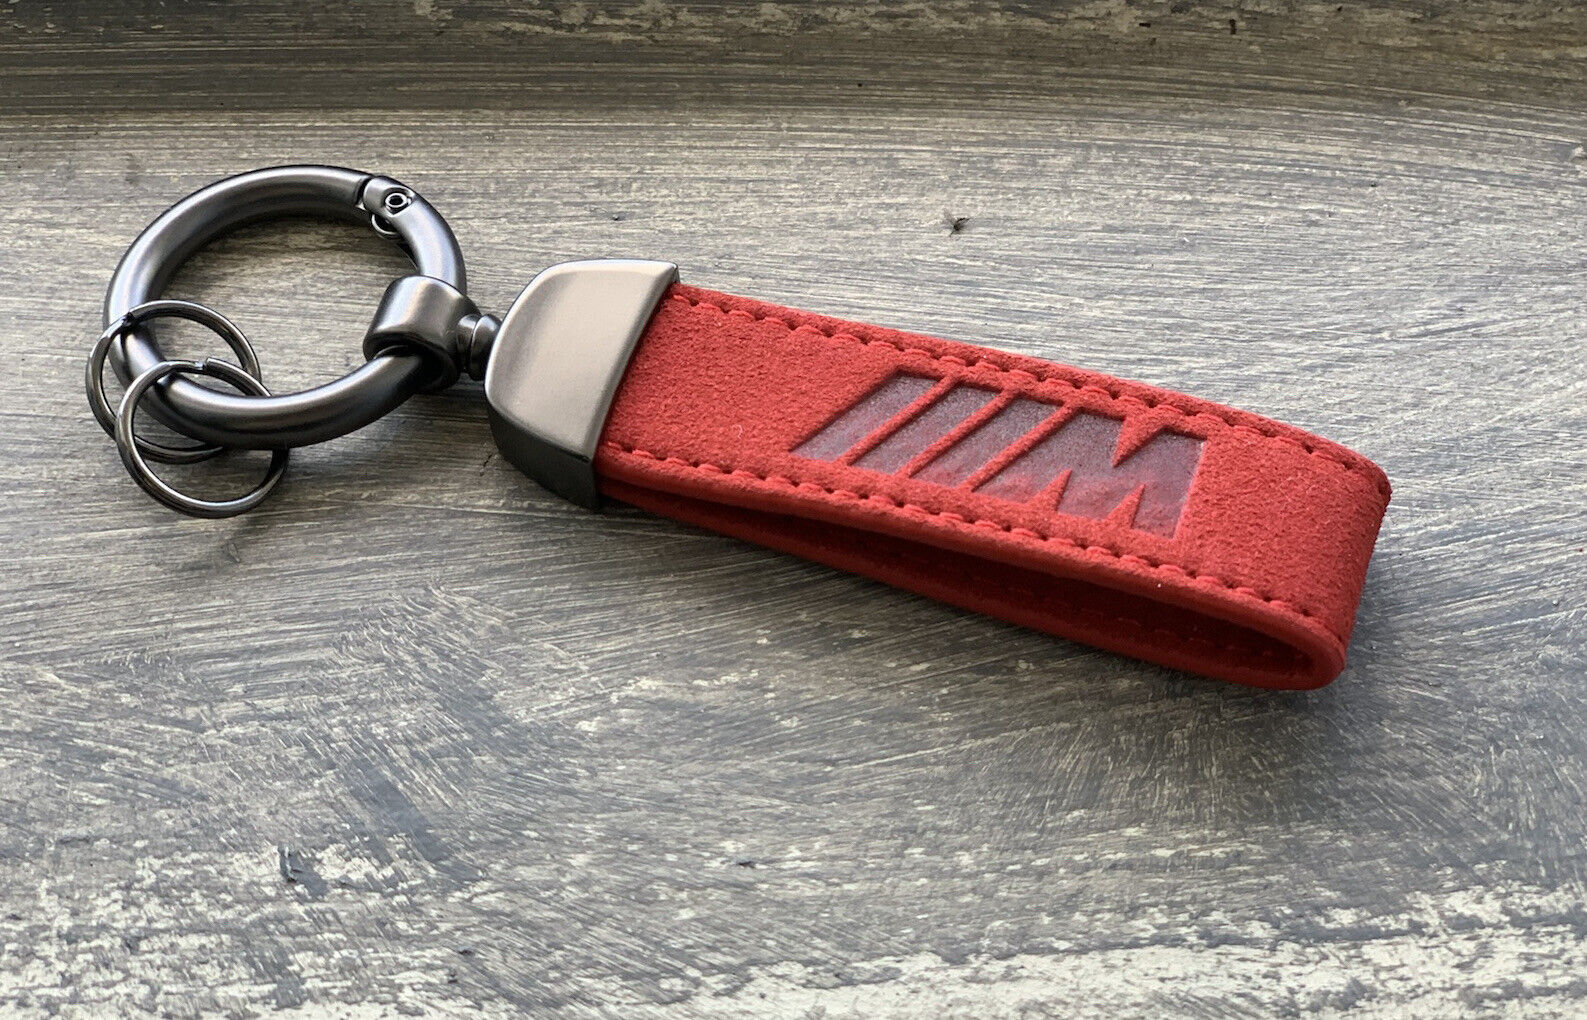 NEW FOR BMW ///M LOGO / SPORT KEYCHAIN/KEYRING RED SUEDE LEATHER M1,M3,M4,M5,M6